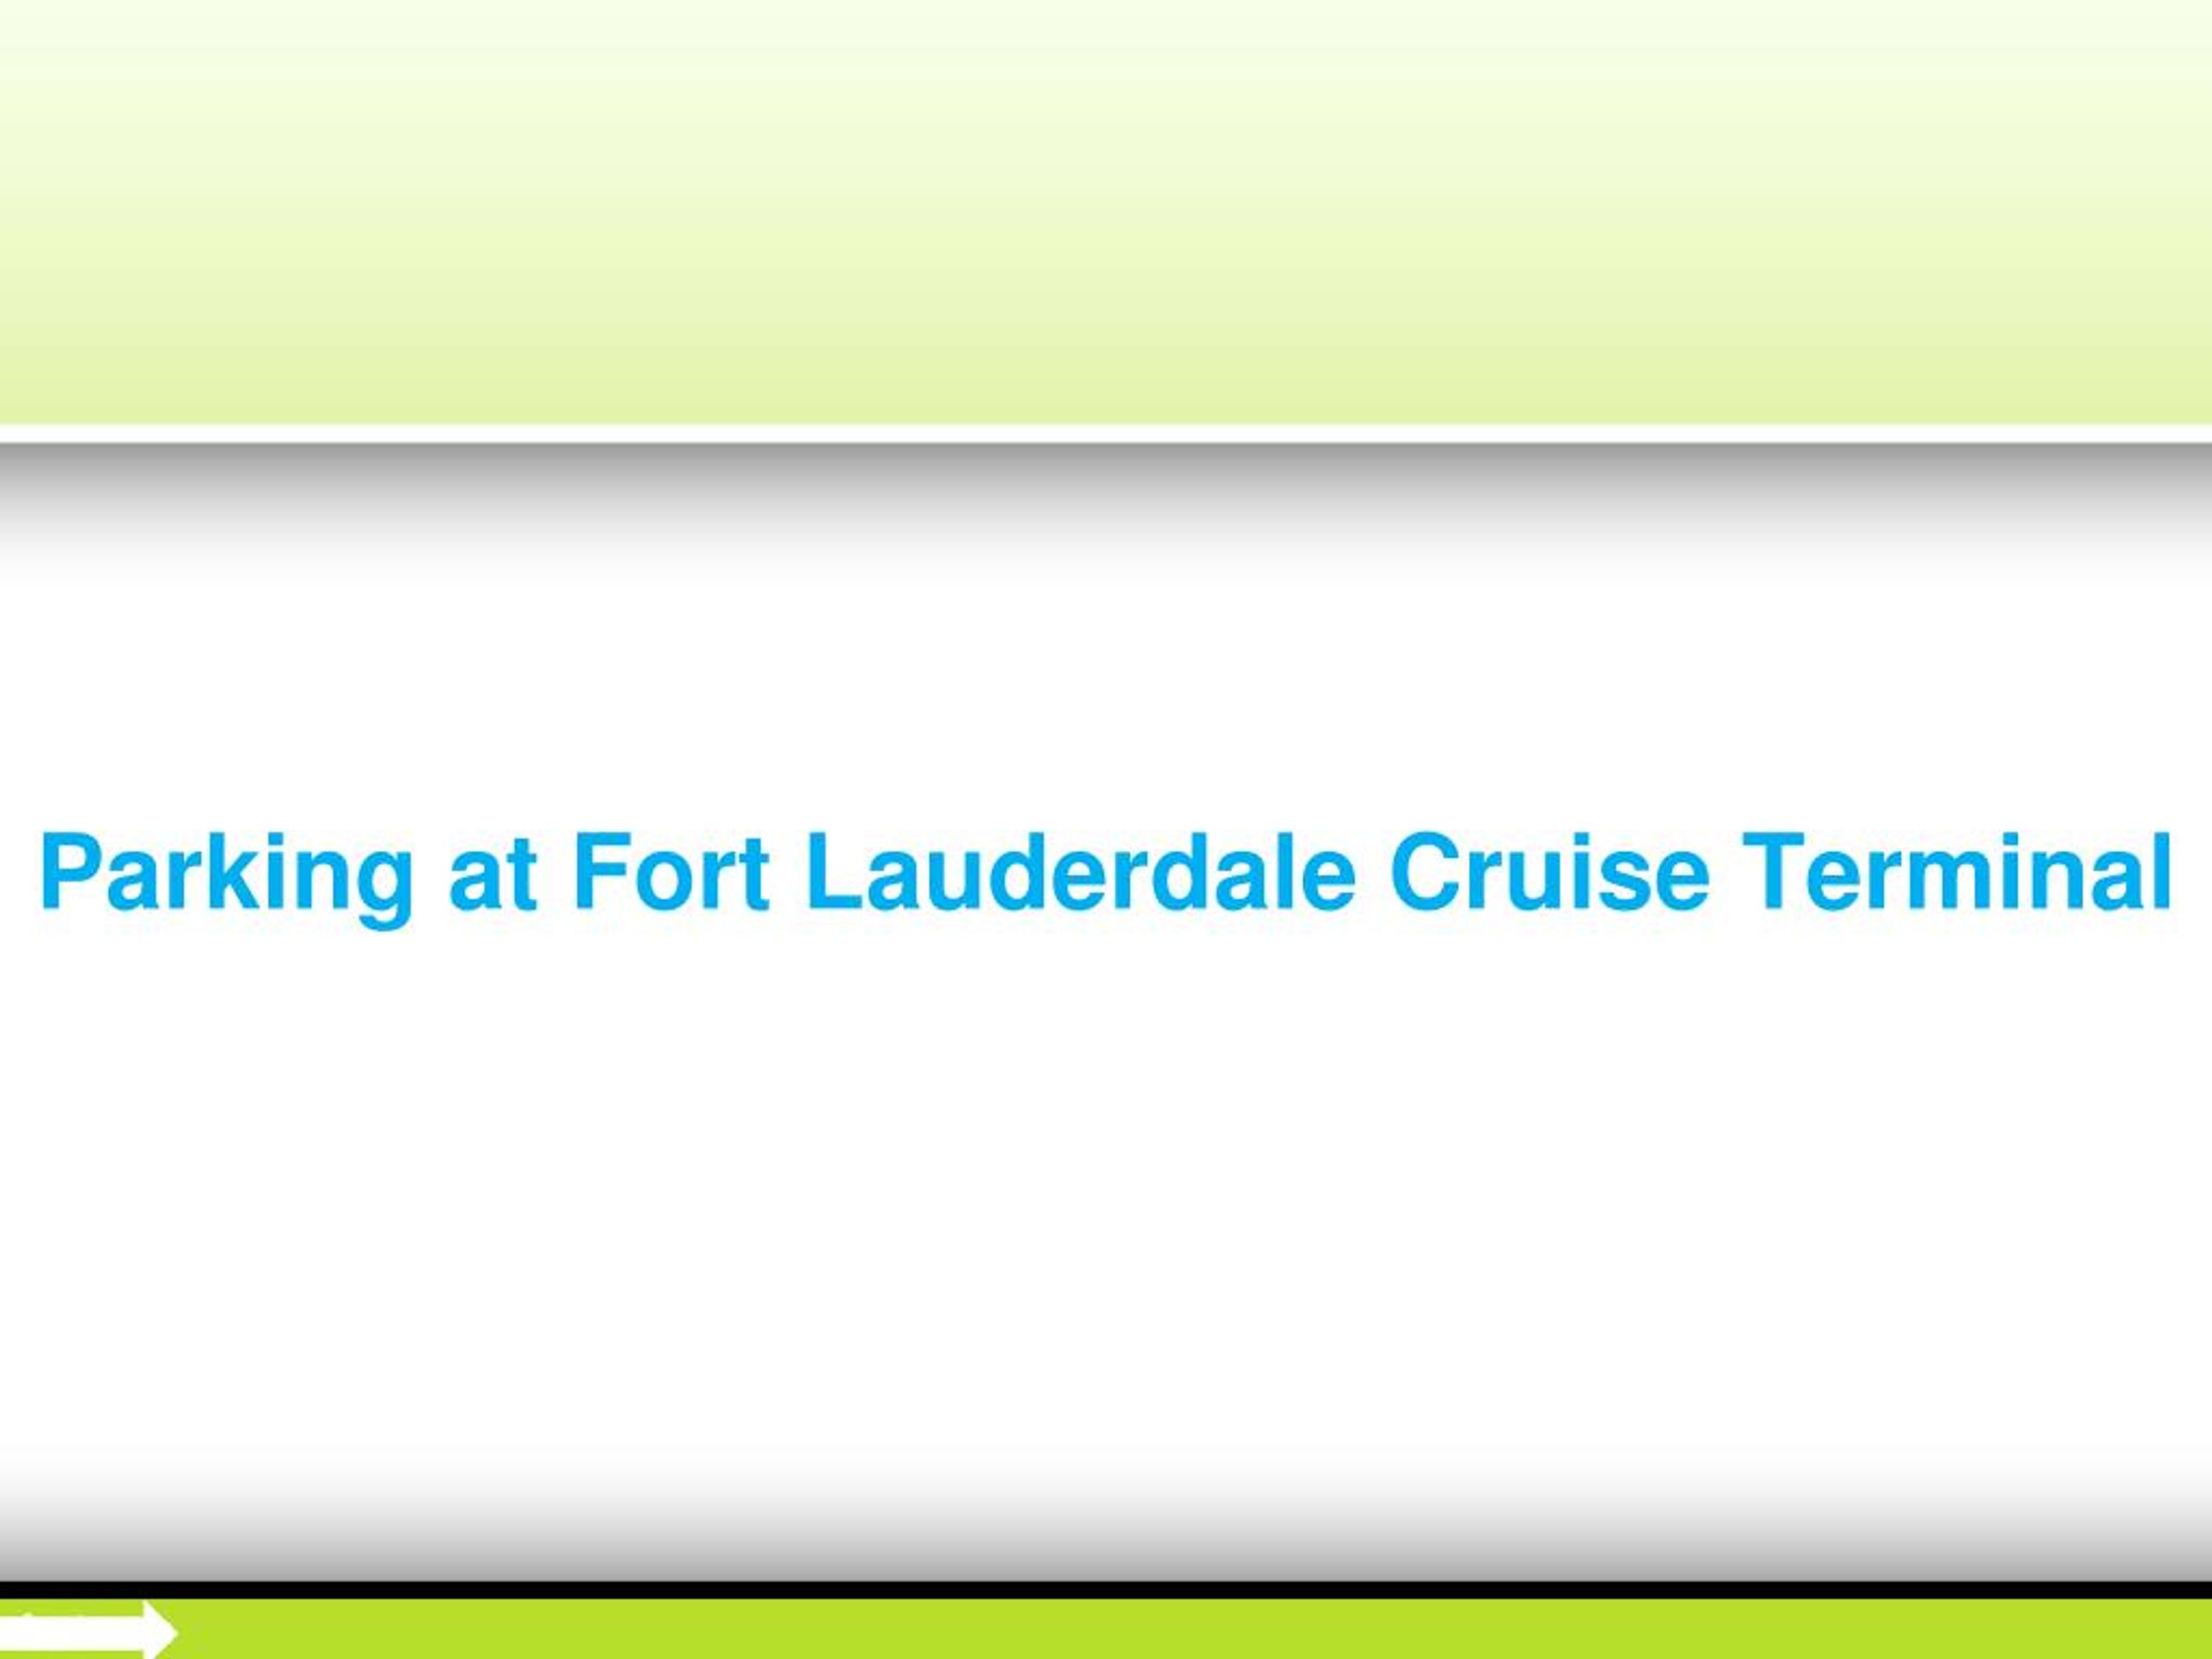 PPT - Parking at Fort Lauderdale Cruise Terminal PowerPoint